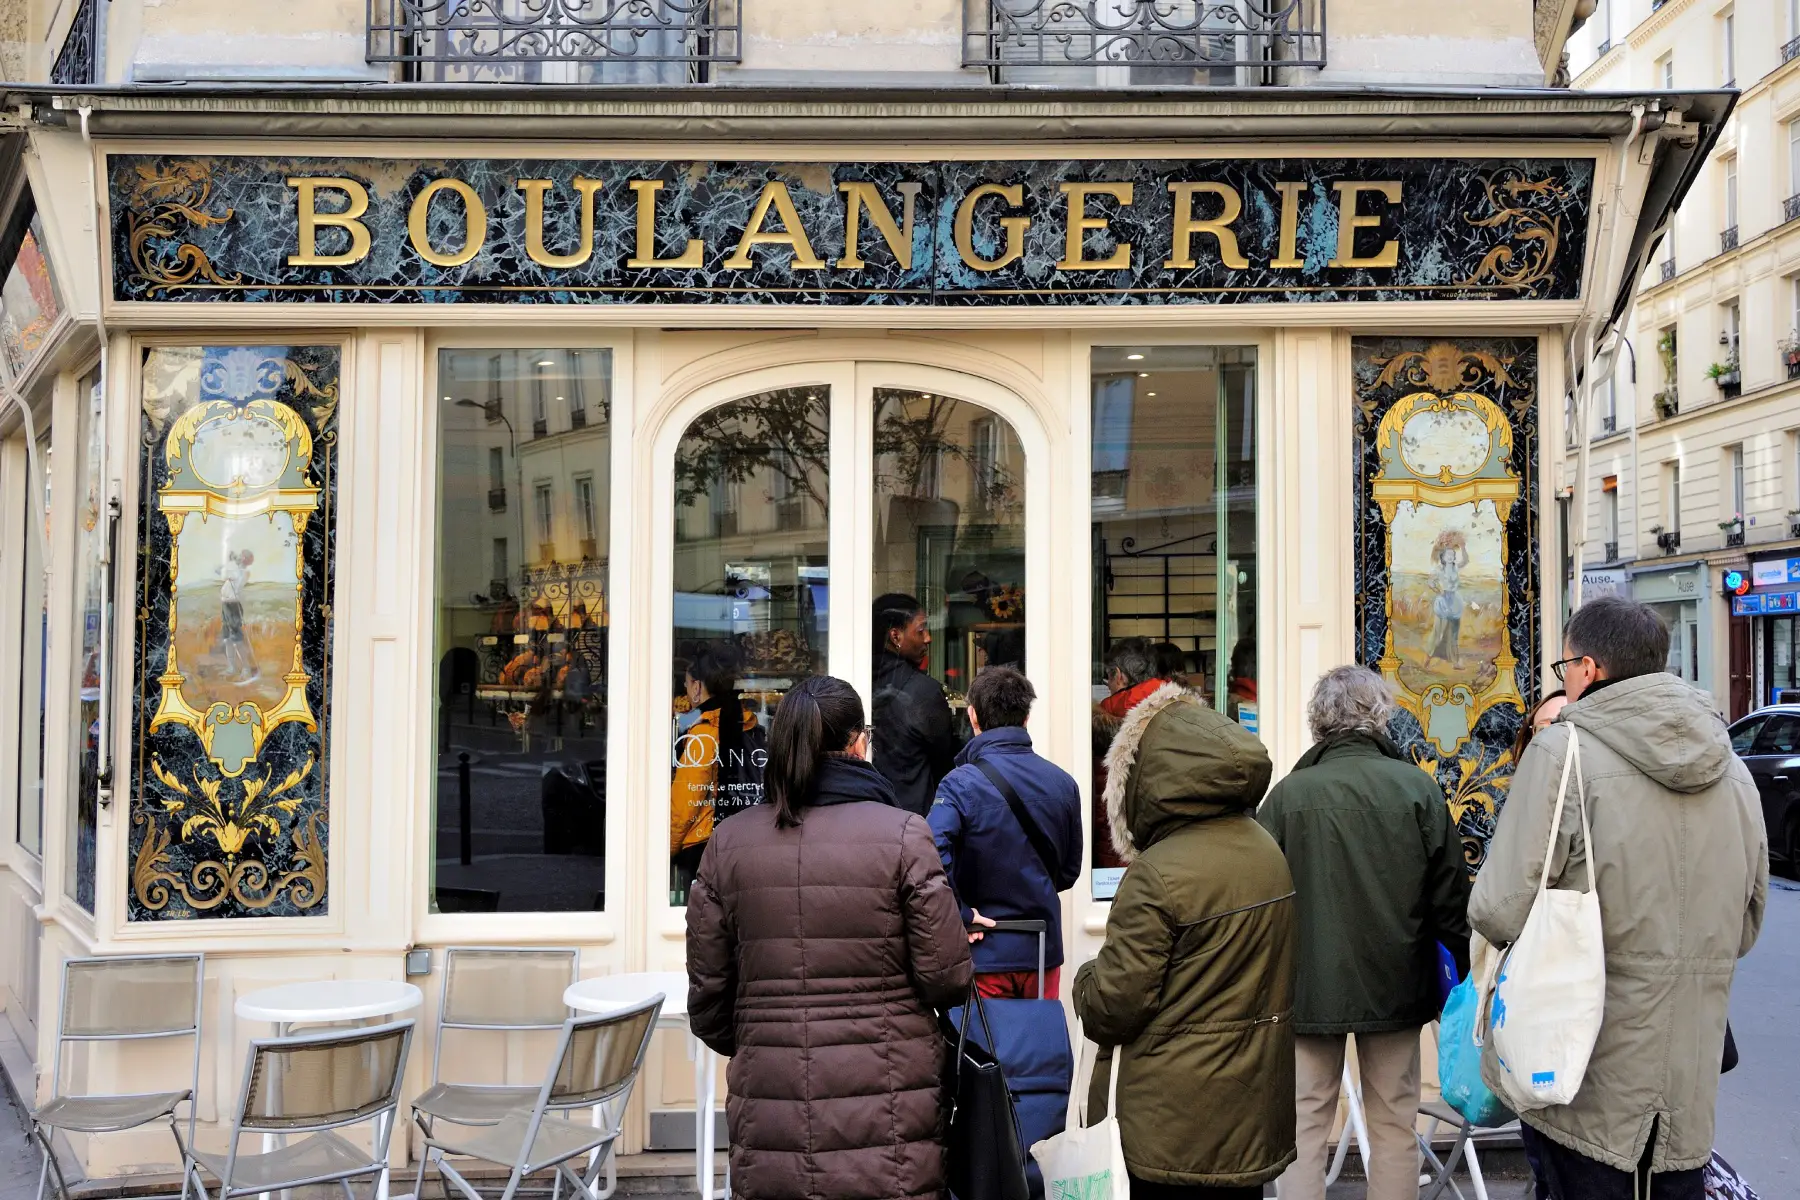 Queue forming outside of a boulangerie in Paris during winter